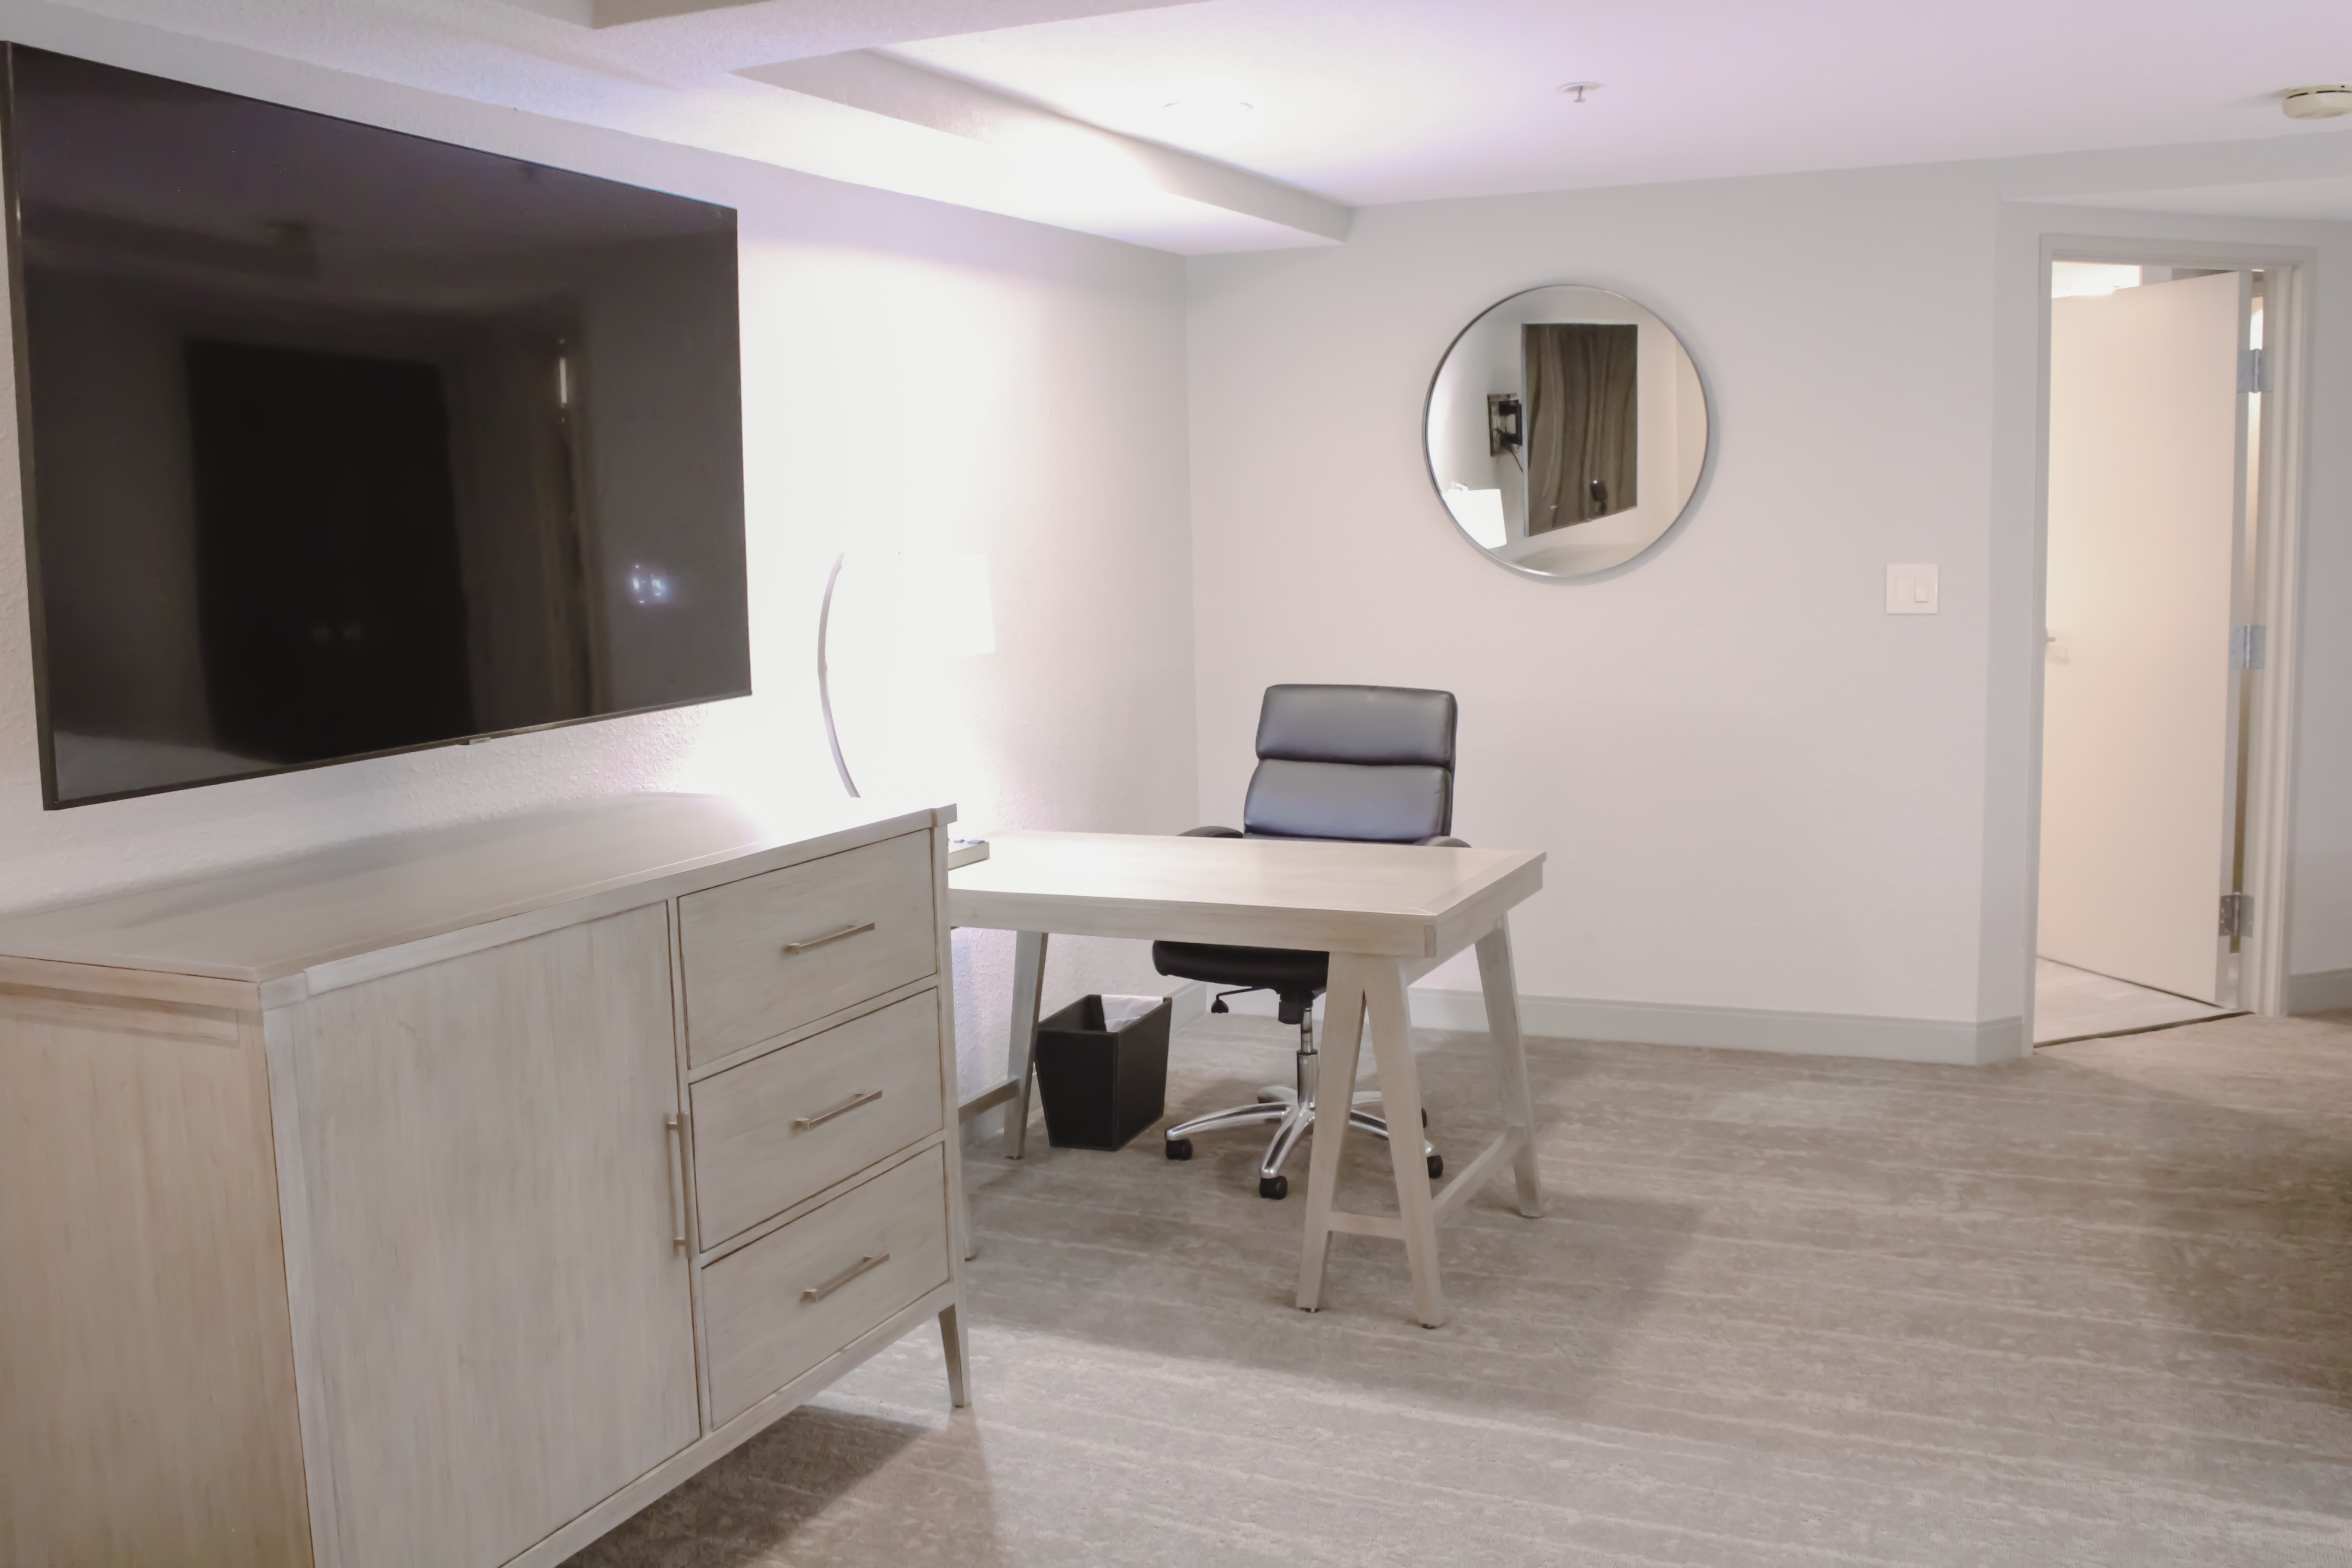 Wall mounted TV and work desk with chair